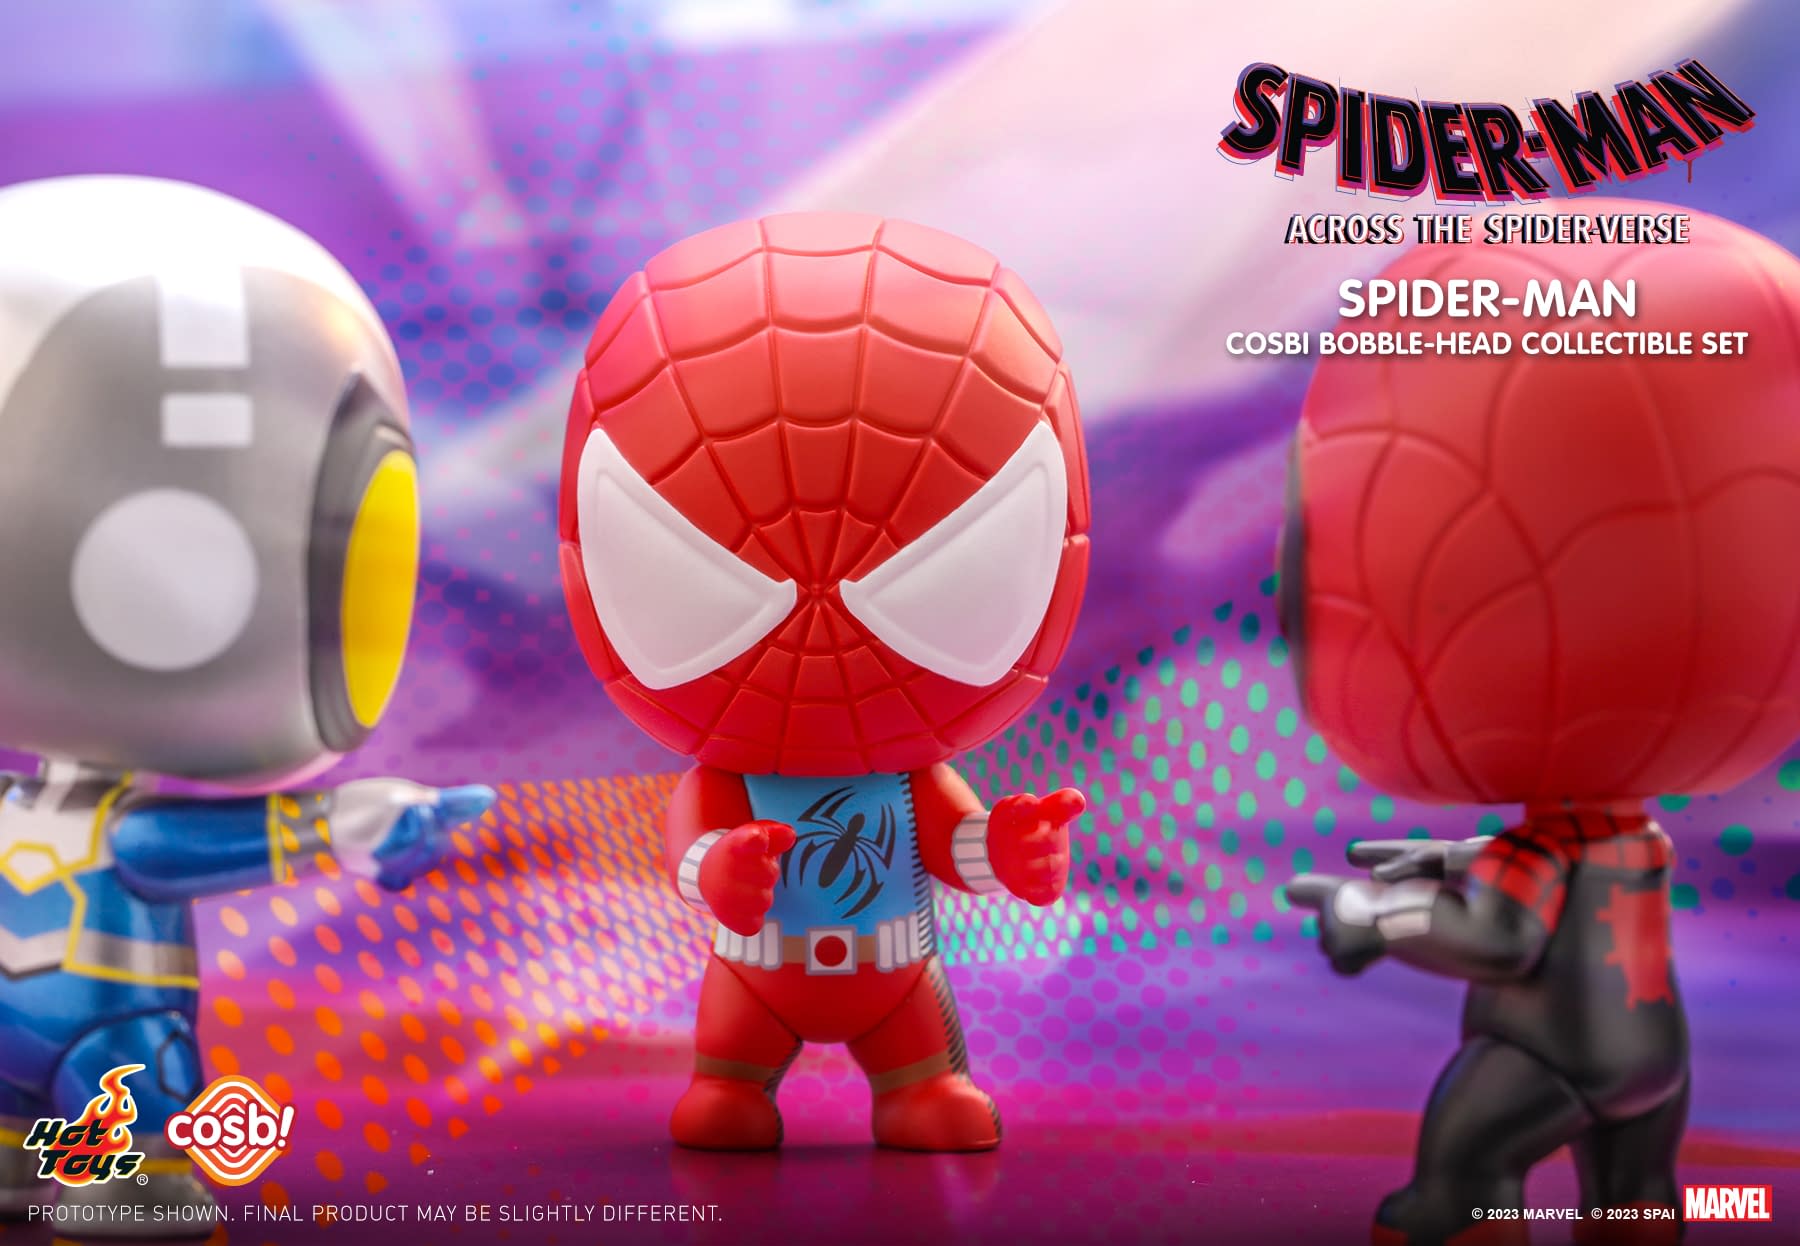 Enter the Spider Society with Hot Toys Newest Spider-Man Cosbi Set5